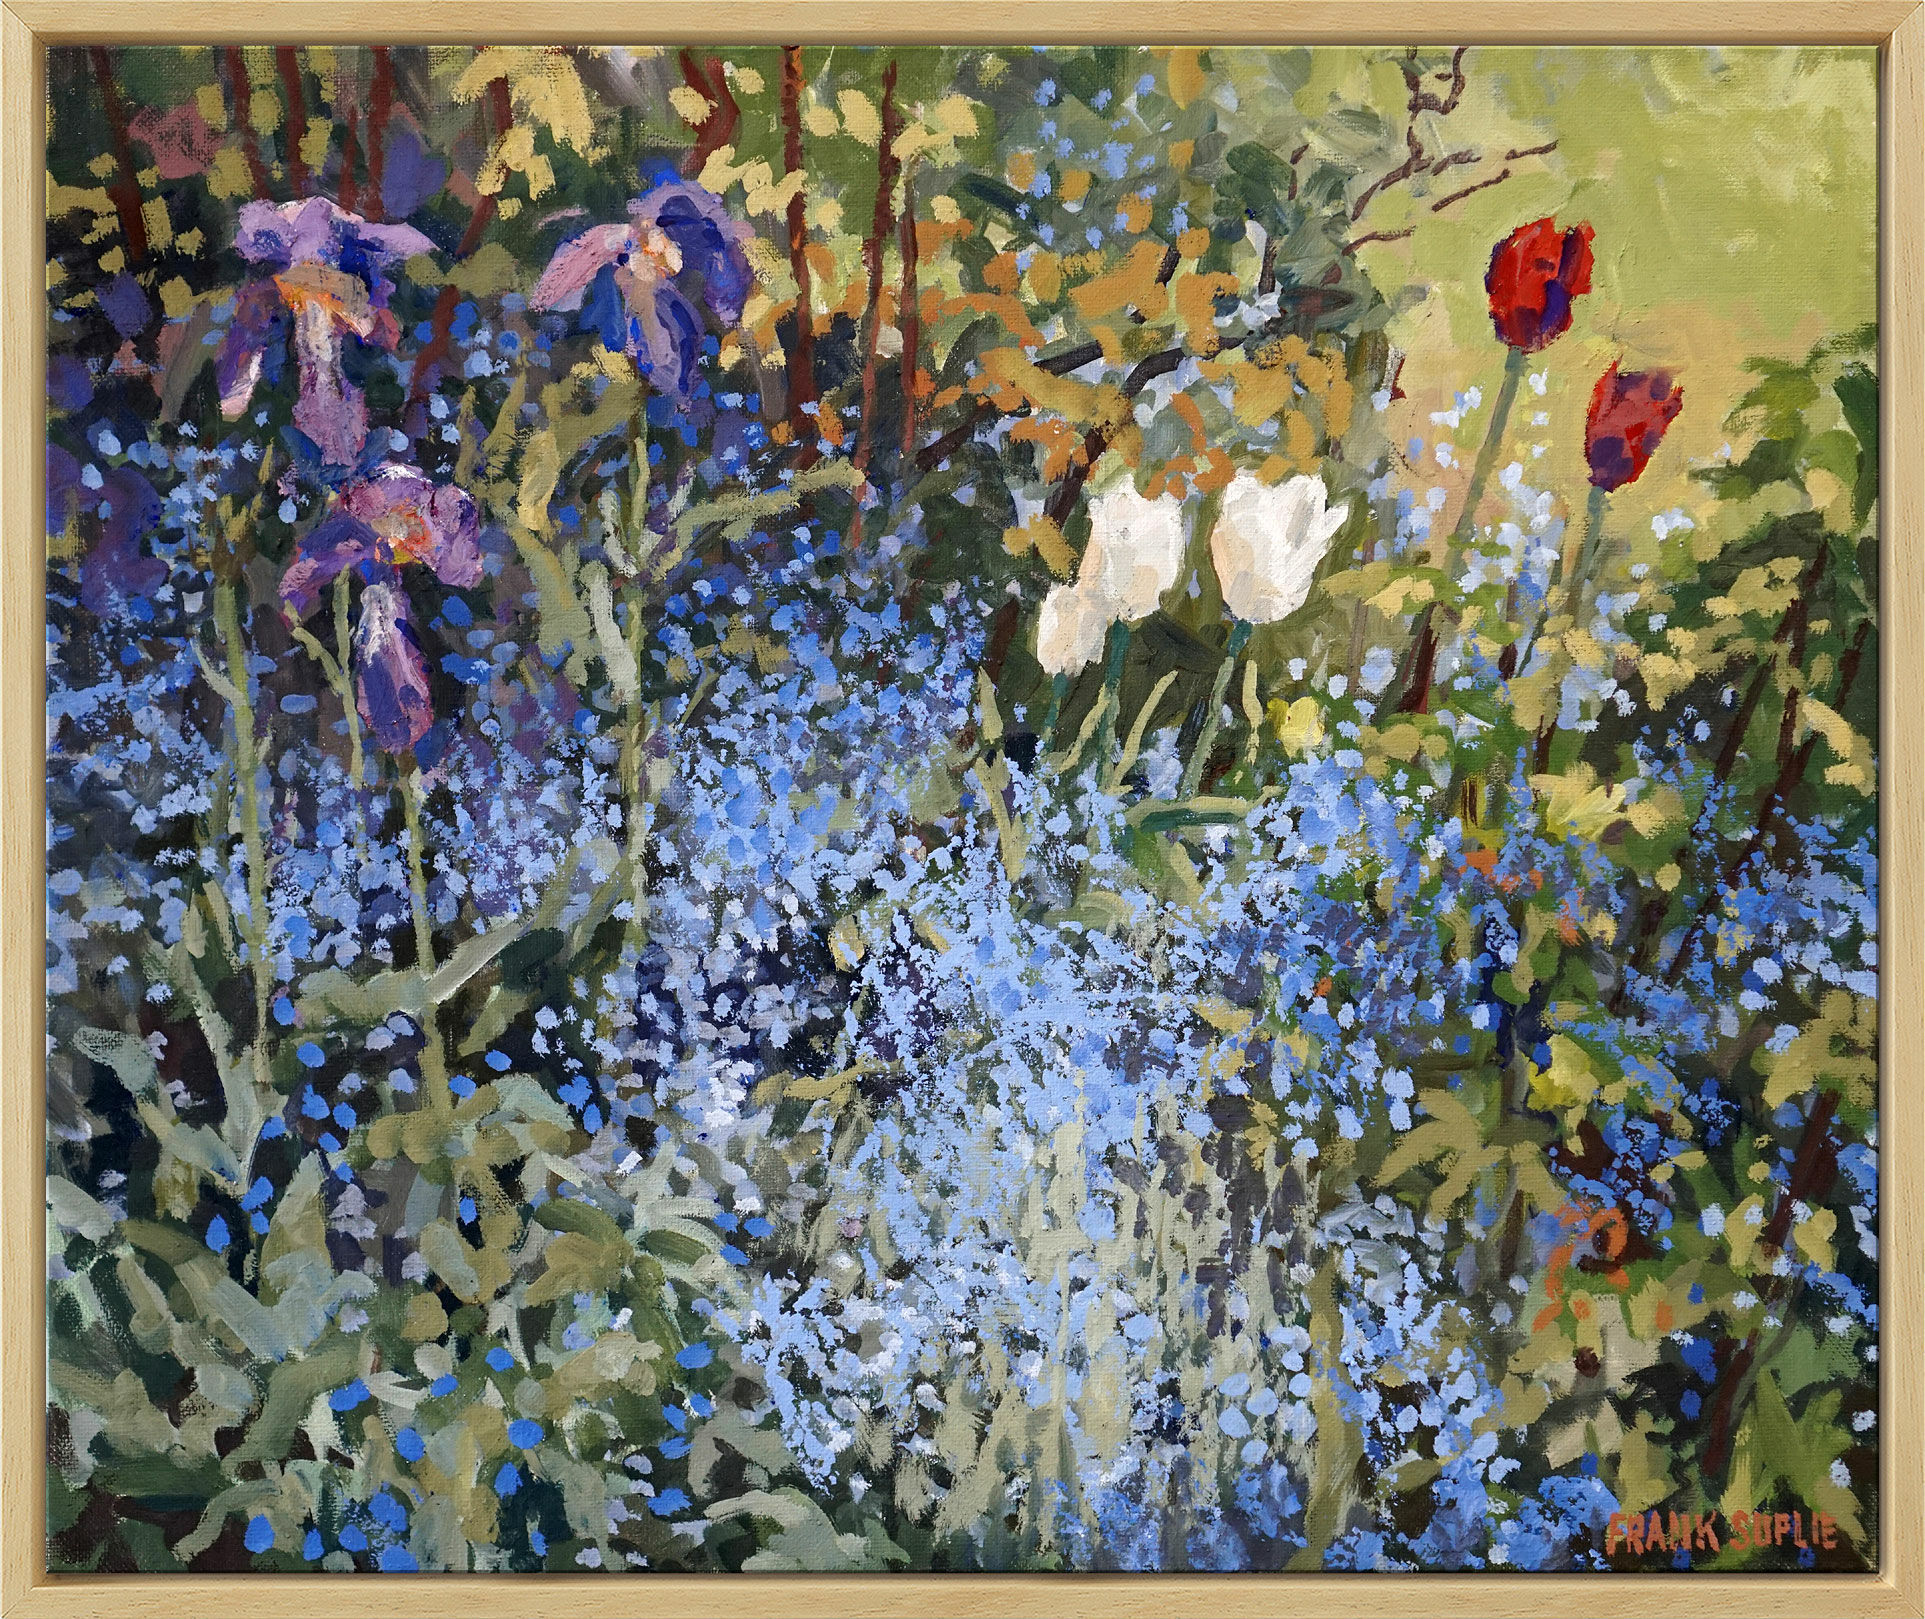 Picture " Forget-Me-Not, Iris and Tulips" (2020) (Original / Unique piece), framed by Frank Suplie